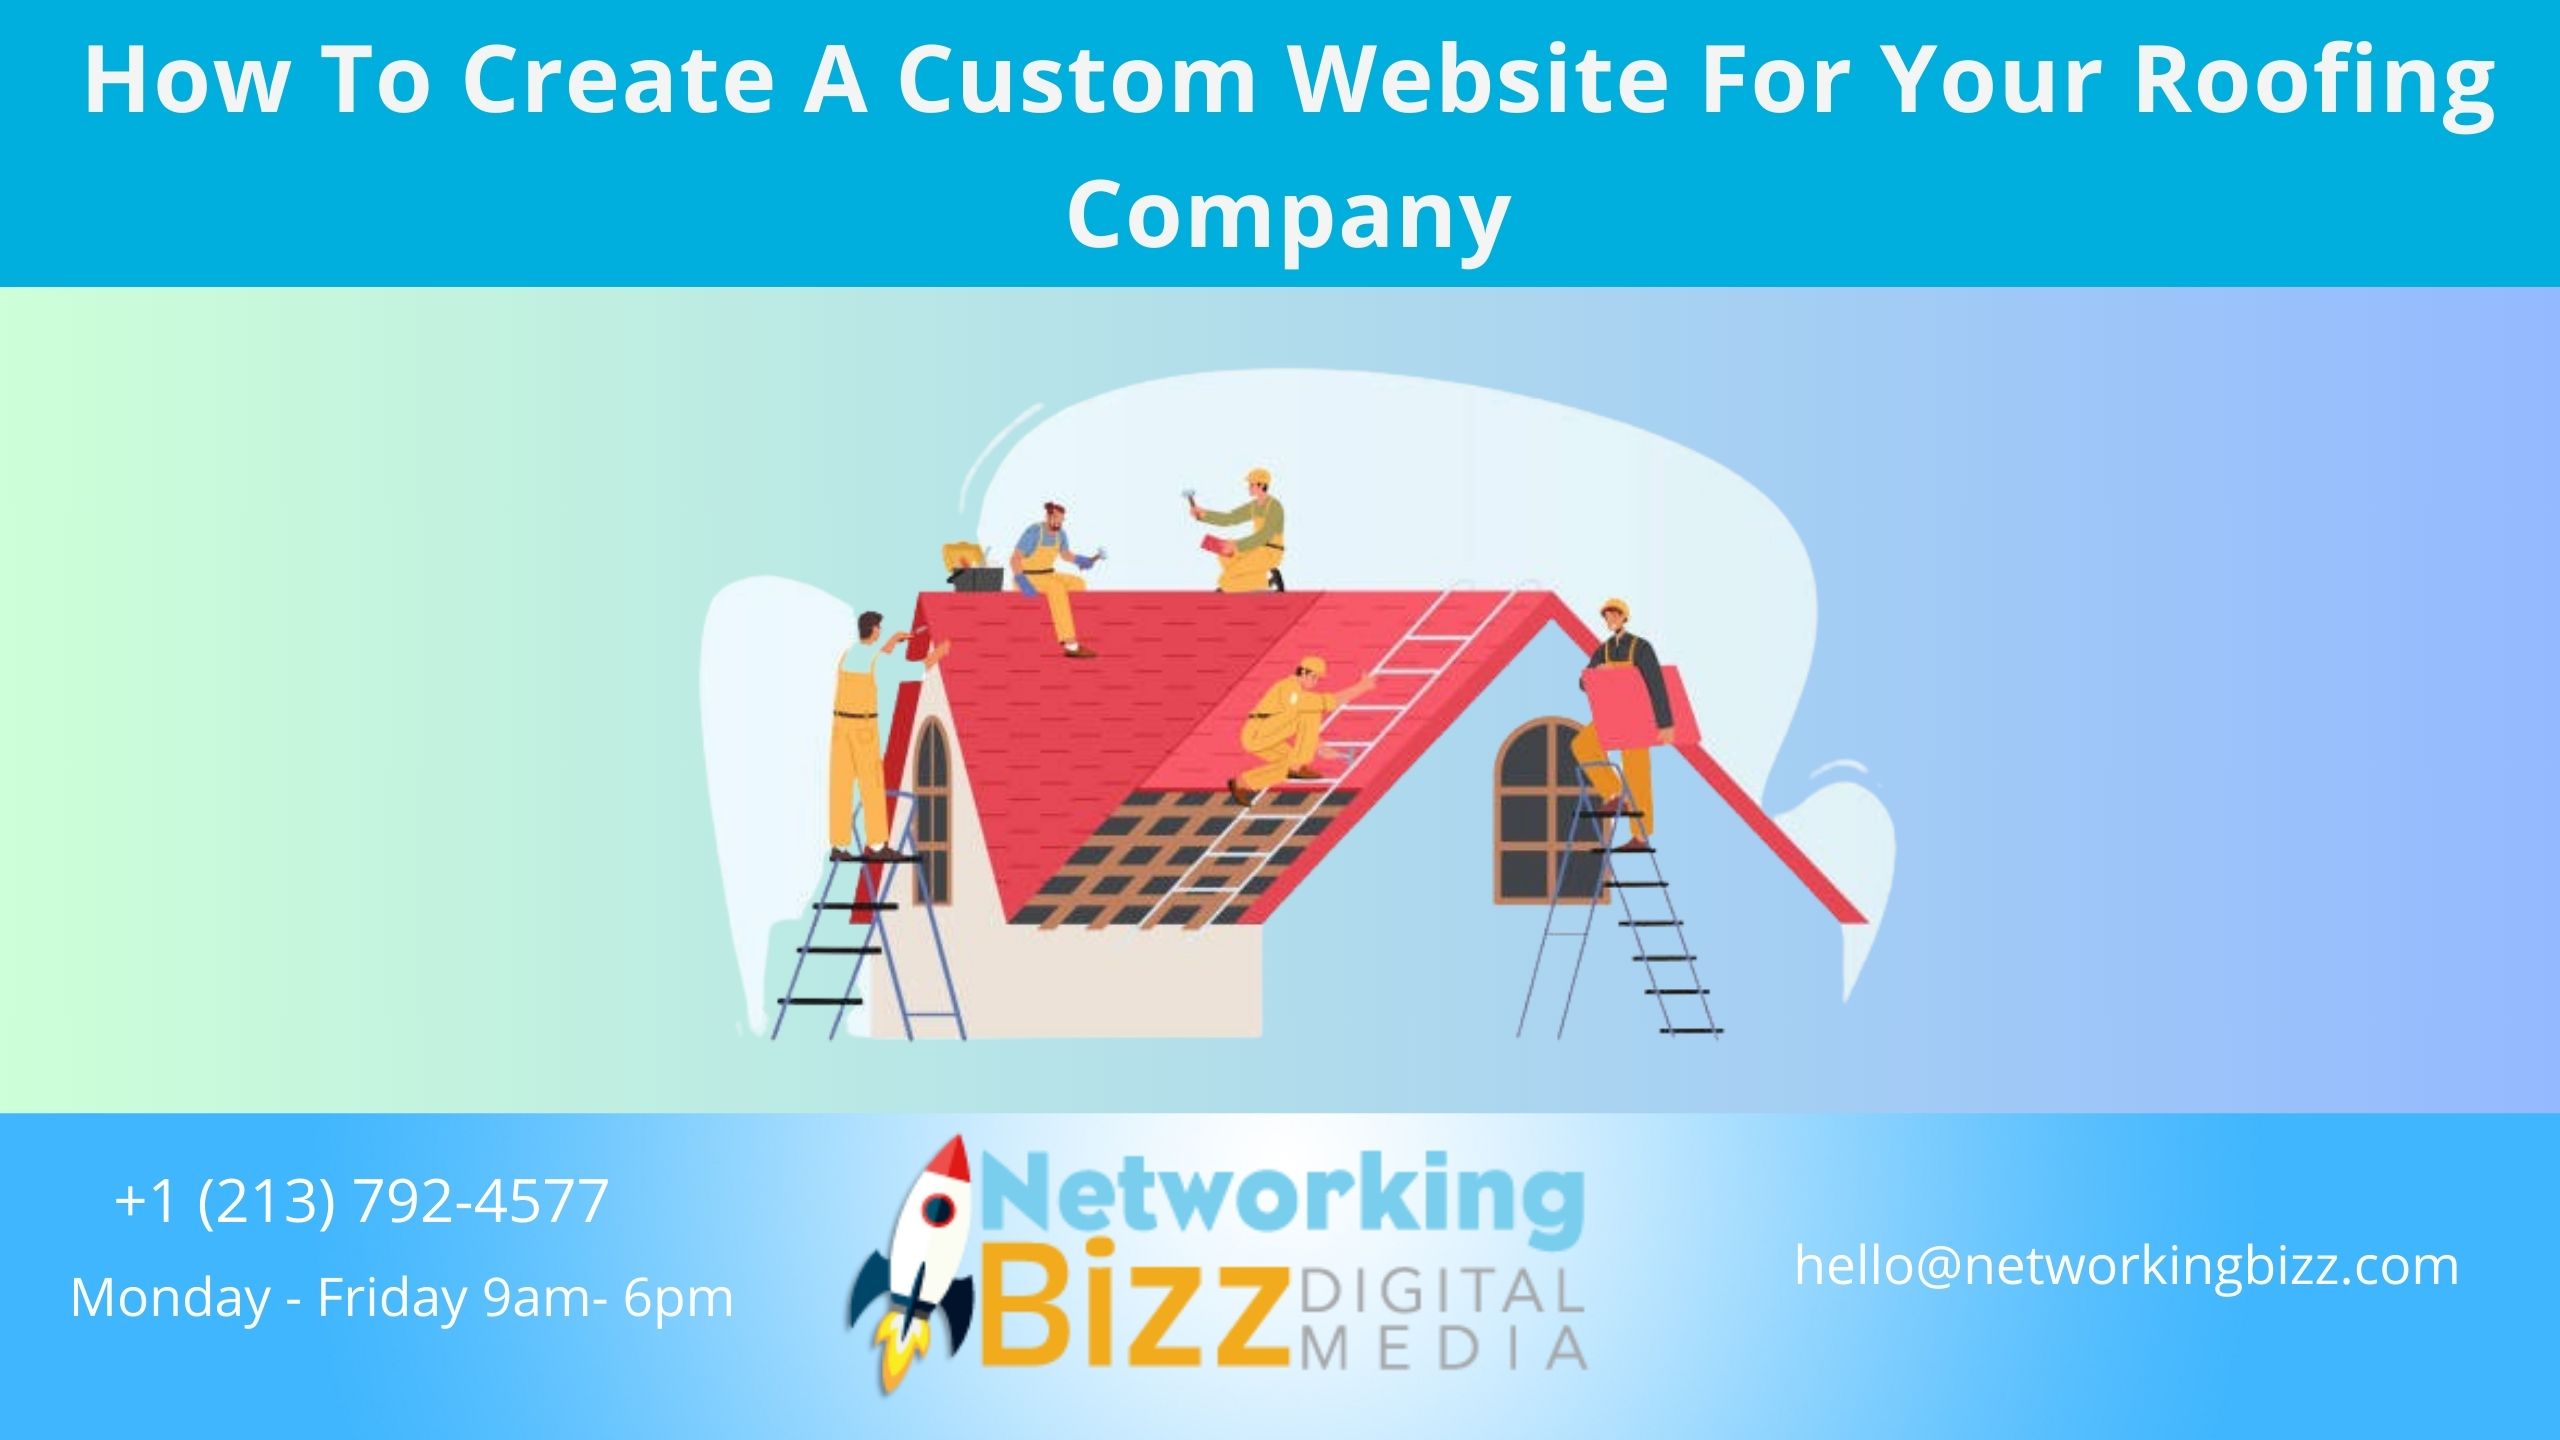 How To Create A Custom Website For Your Roofing Company